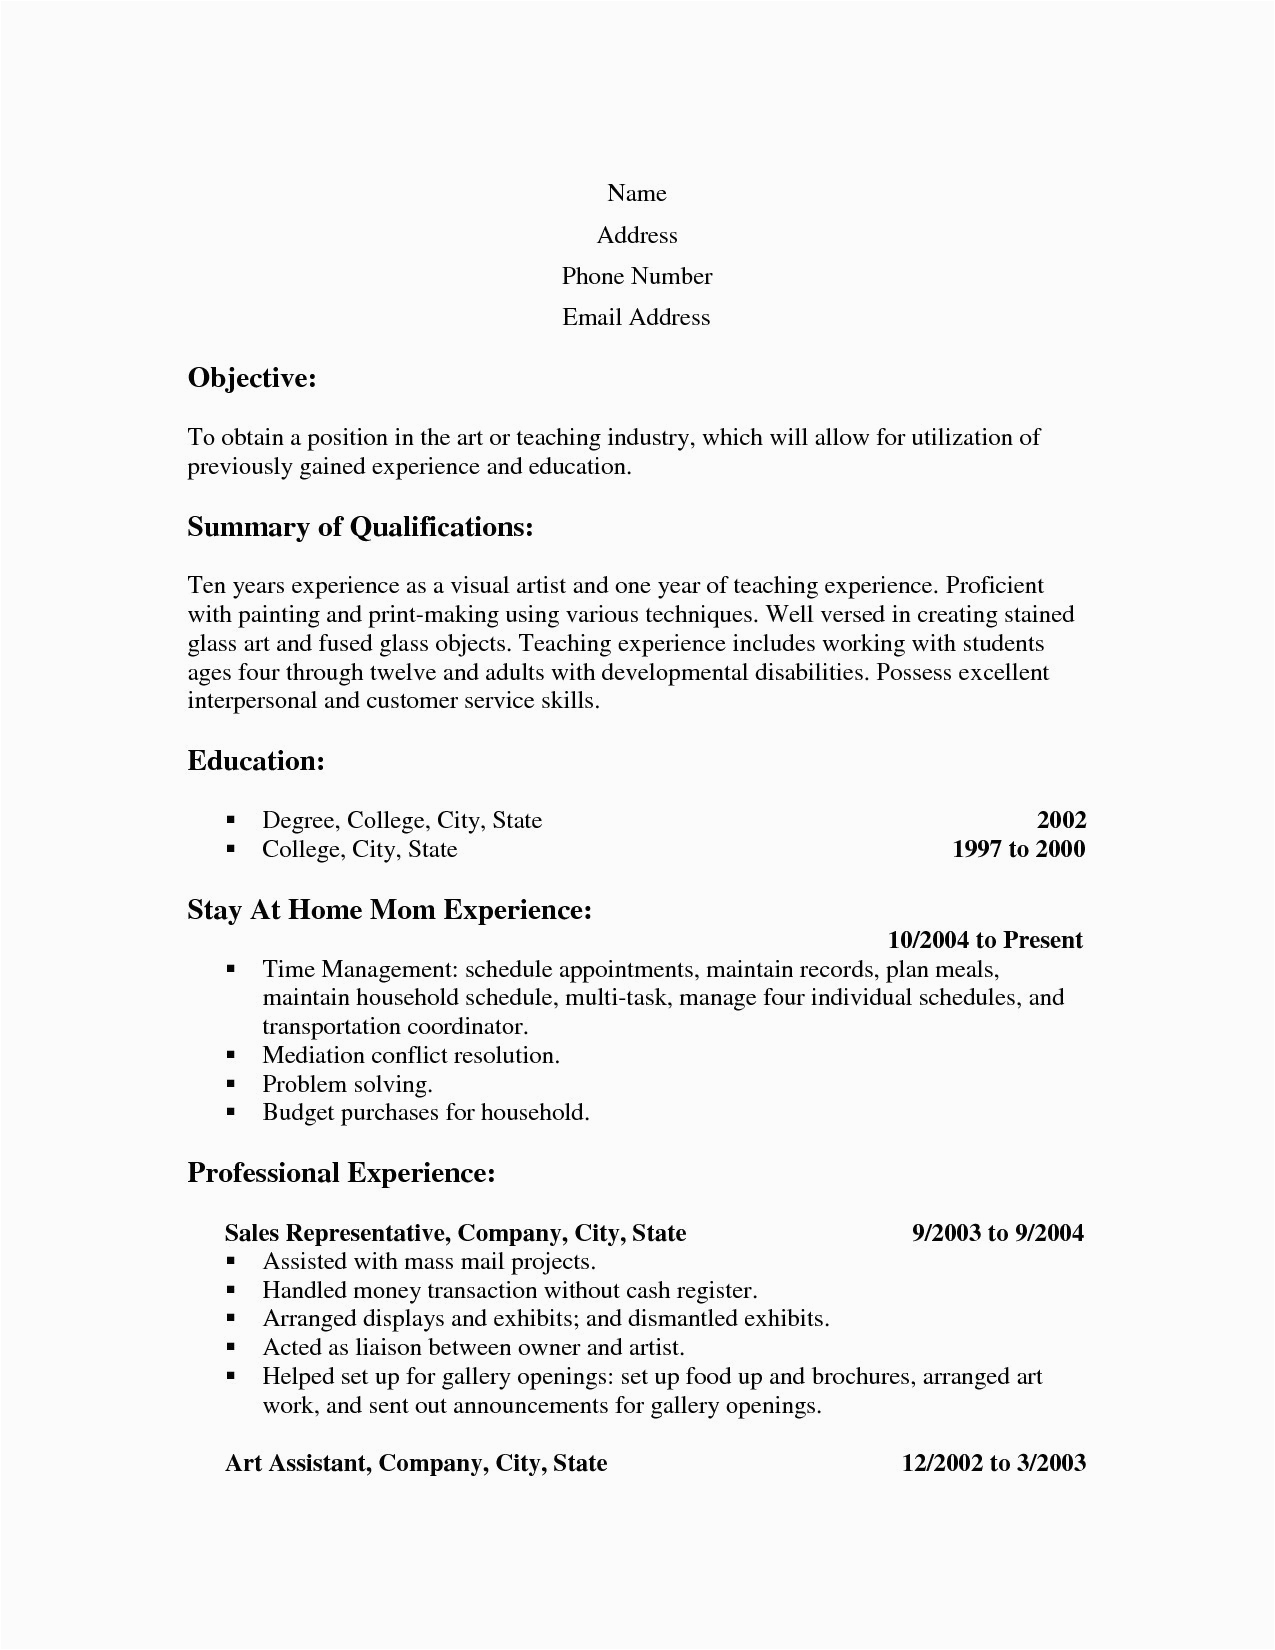 resume examples for stay at home moms